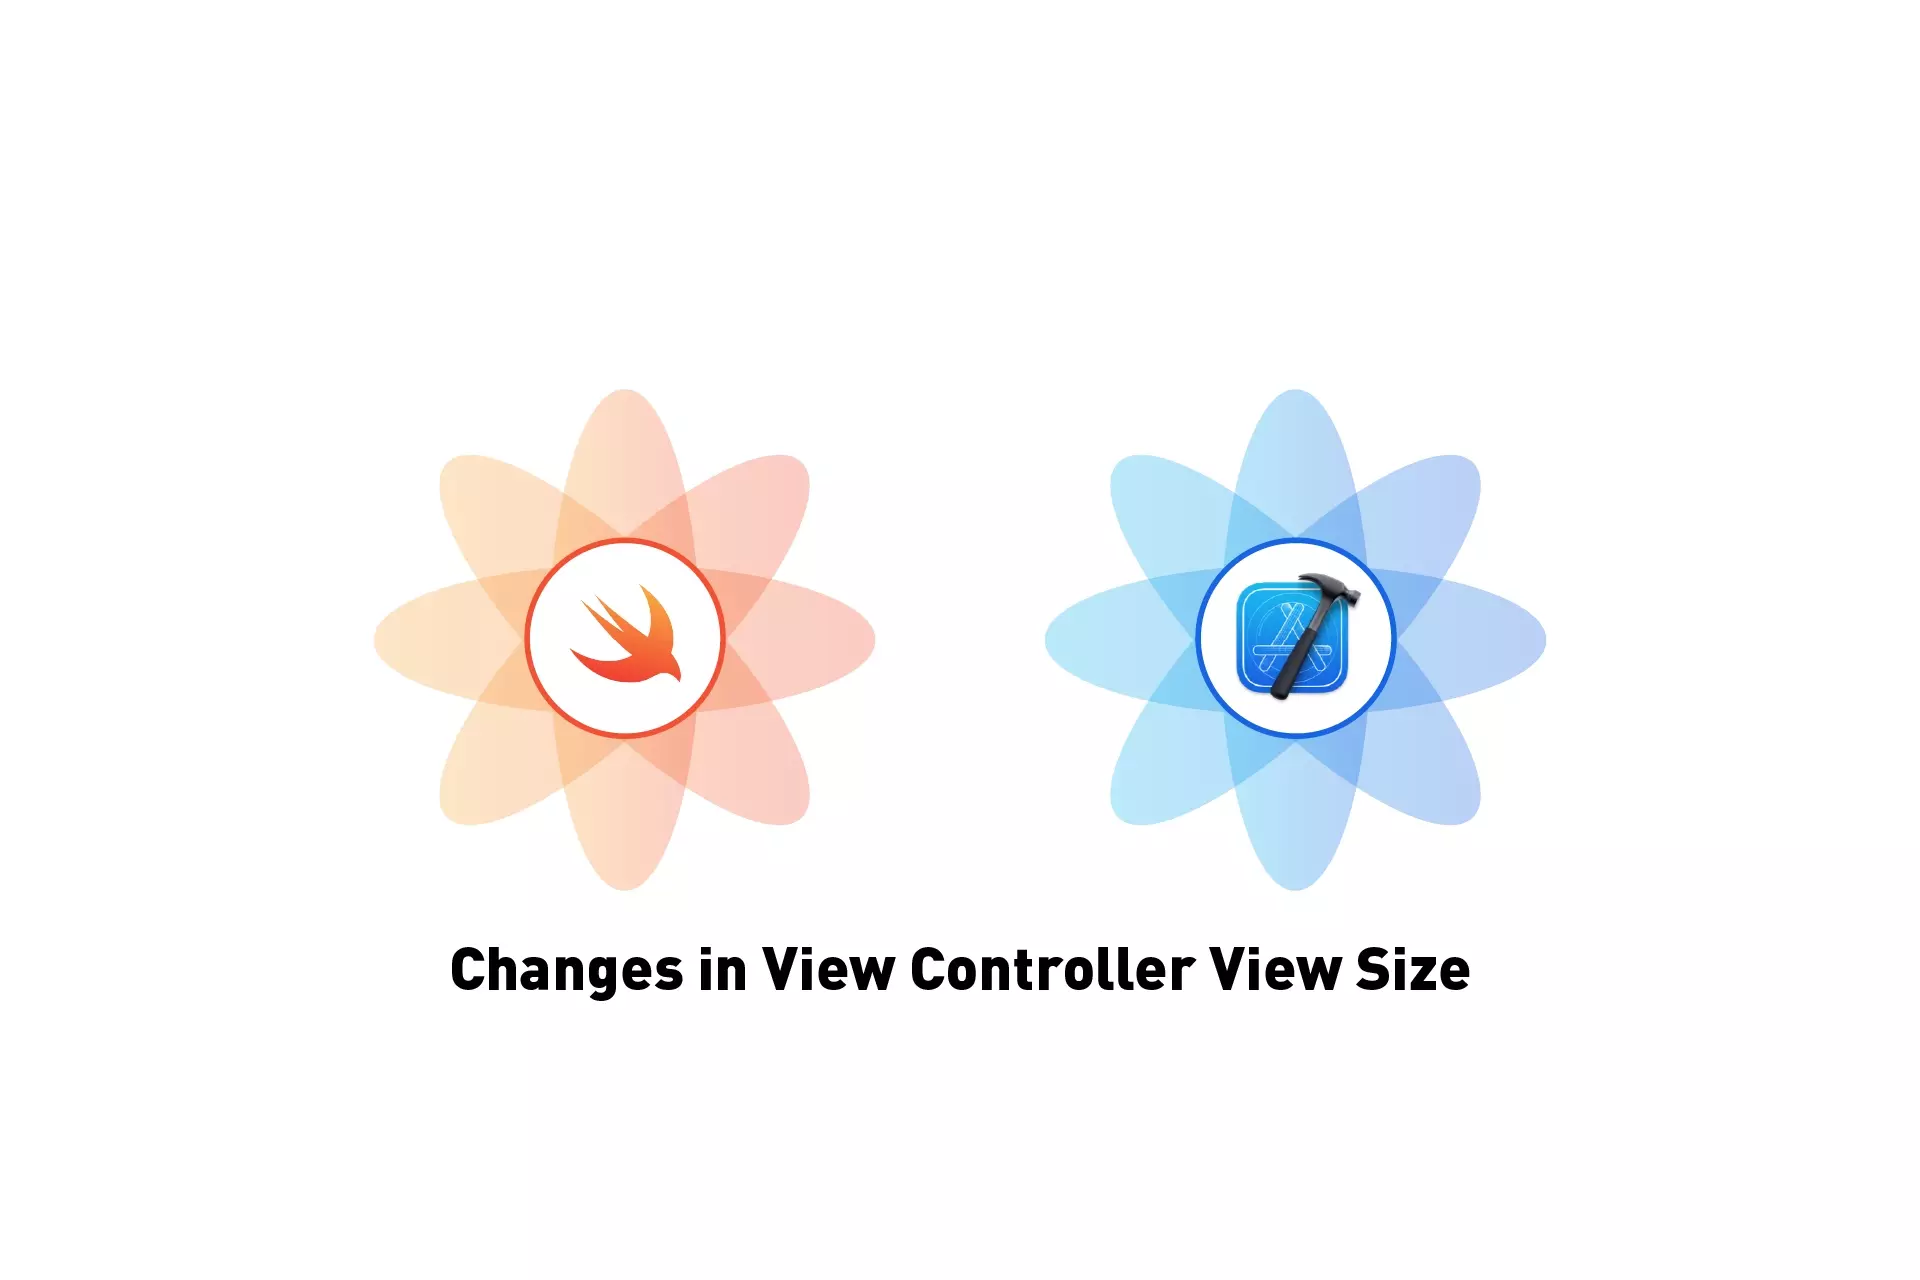 Two flowers that represent Swift and XCode, beneath them sits the text "Changes in View Controller View Size."